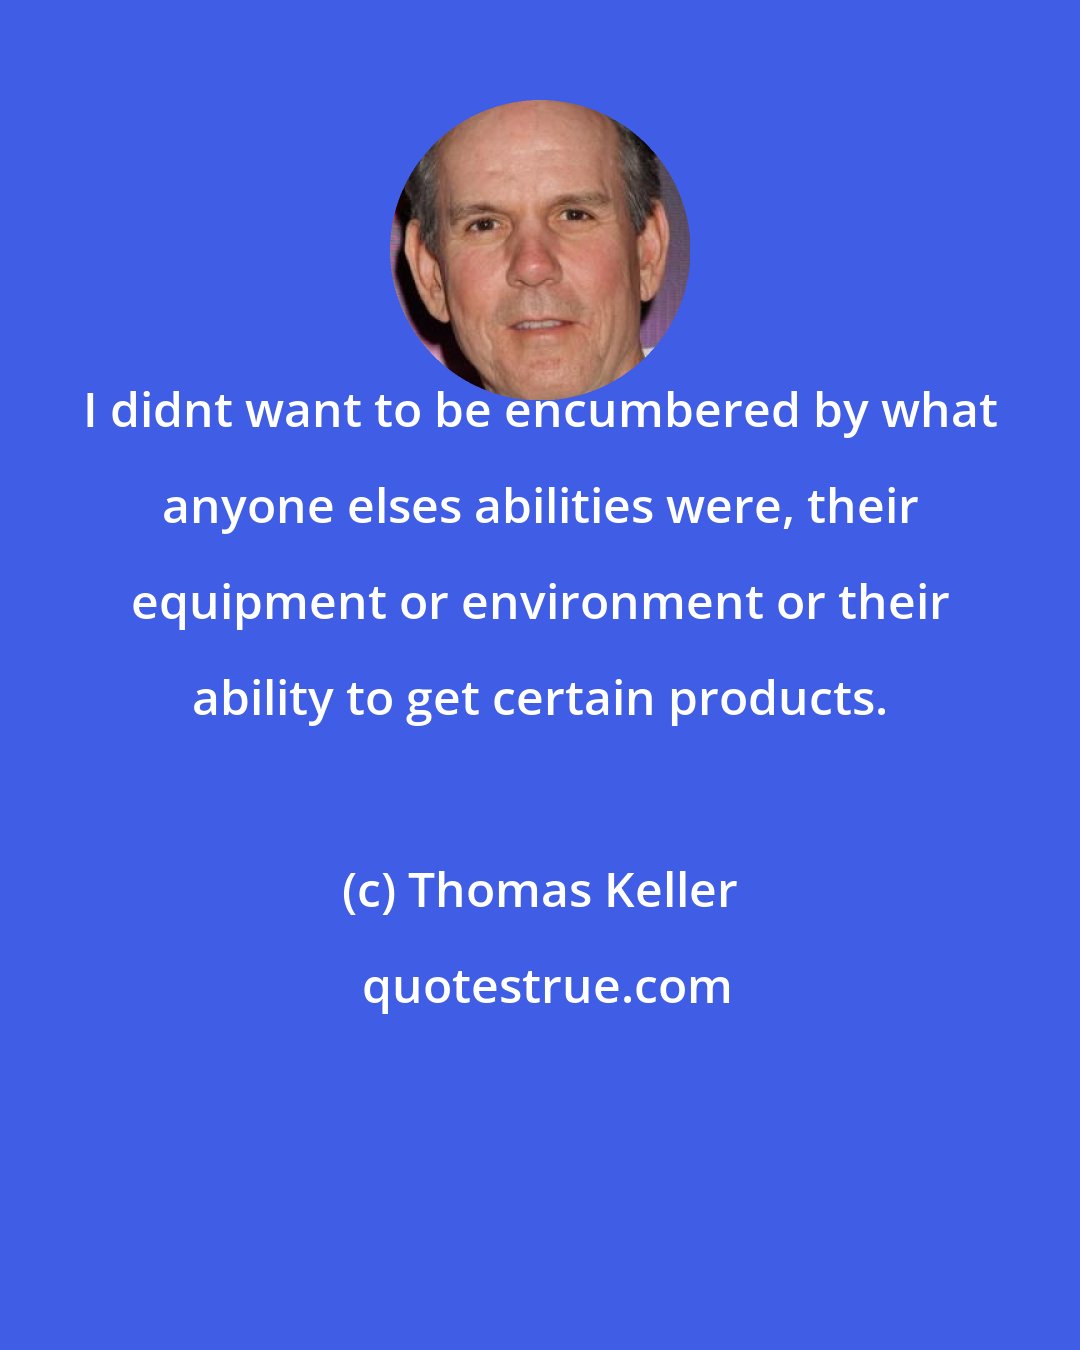 Thomas Keller: I didnt want to be encumbered by what anyone elses abilities were, their equipment or environment or their ability to get certain products.